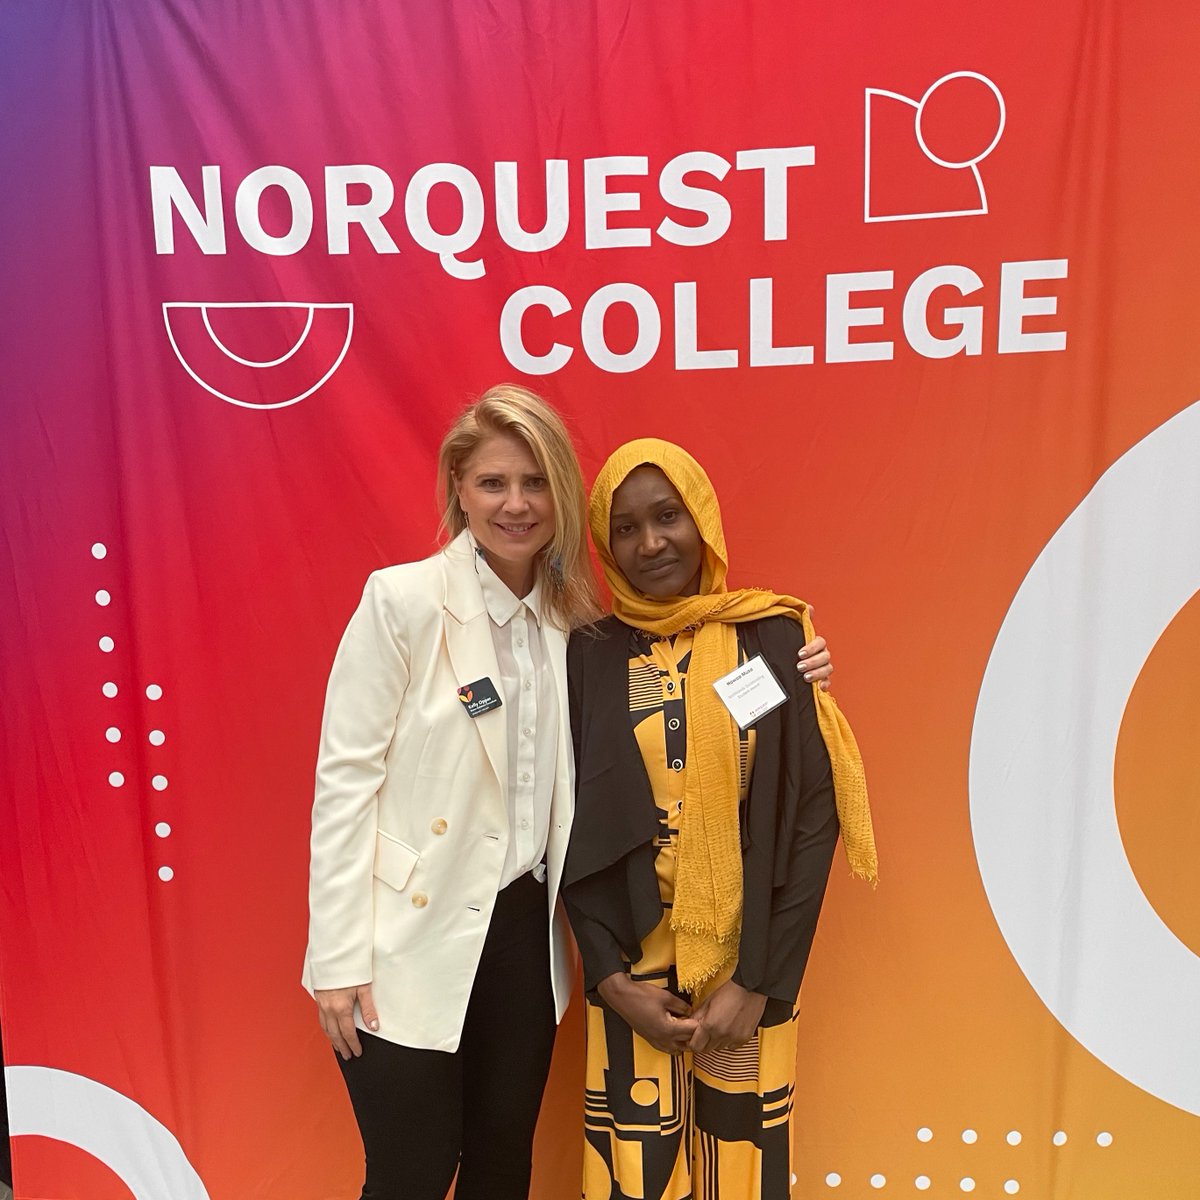 On Tuesday evening, NorQuest College hosted our inaugural Donor Appreciation Reception for our generous Awards and Scholarships Donors. Thank you for being difference makers and removing barriers to education and empowering our learners to pursue their educational goals!